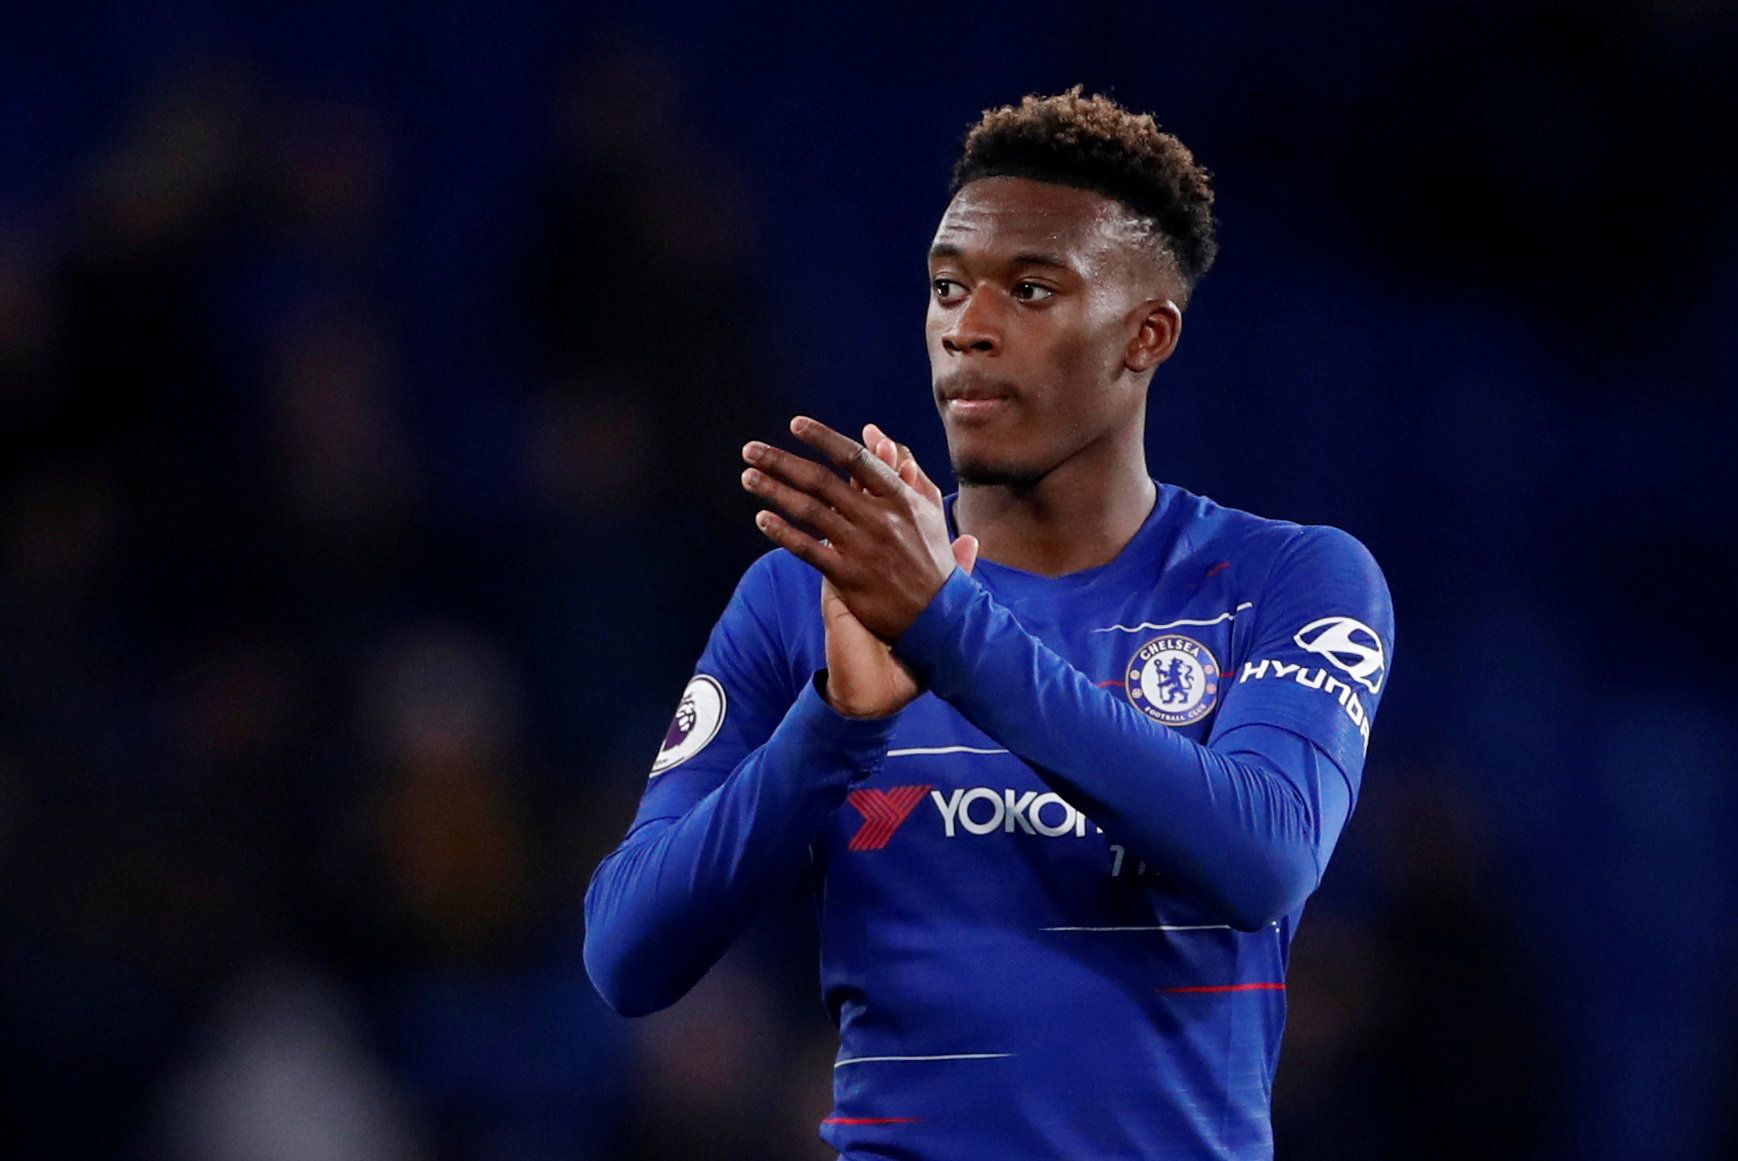 Soccer Football - Premier League - Chelsea v Brighton &amp; Hove Albion - Stamford Bridge, London, Britain - April 3, 2019  Chelsea's Callum Hudson-Odoi applauds fans after the match          Action Images via Reuters/Matthew Childs  EDITORIAL USE ONLY. No use with unauthorized audio, video, data, fixture lists, club/league logos or 